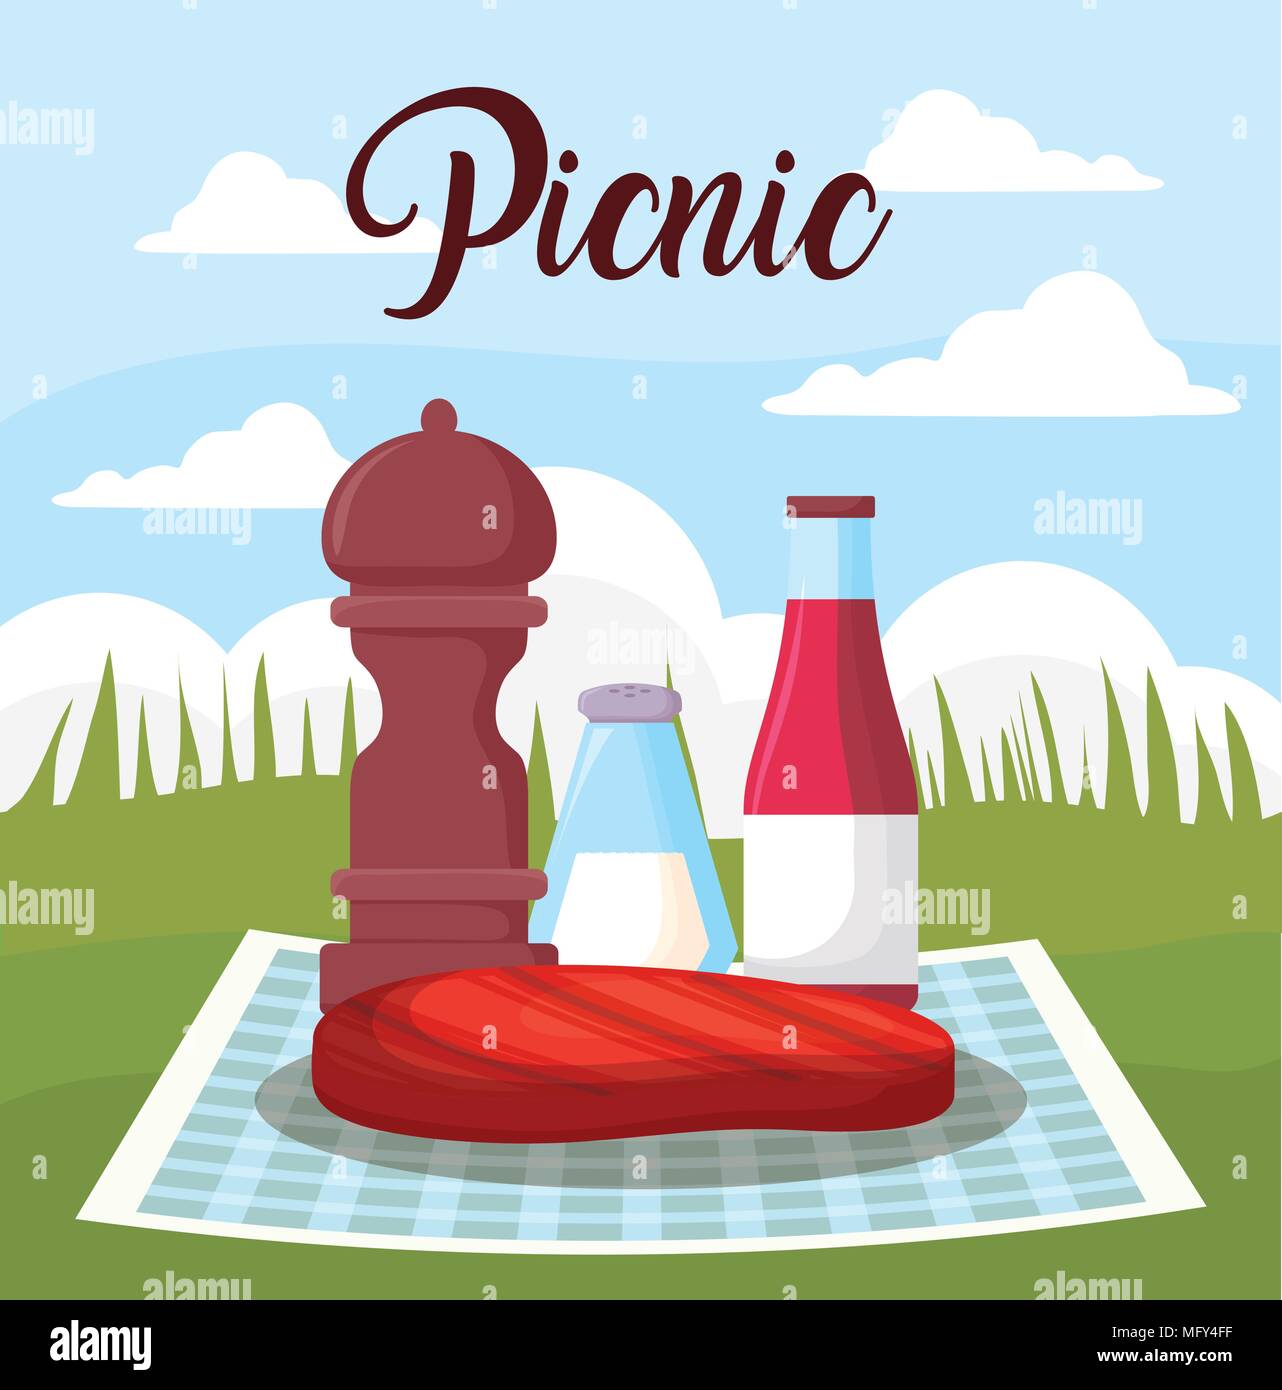 picnic landscape concept with steak of meat and sauce bottles, colorful design. vector illustration Stock Vector